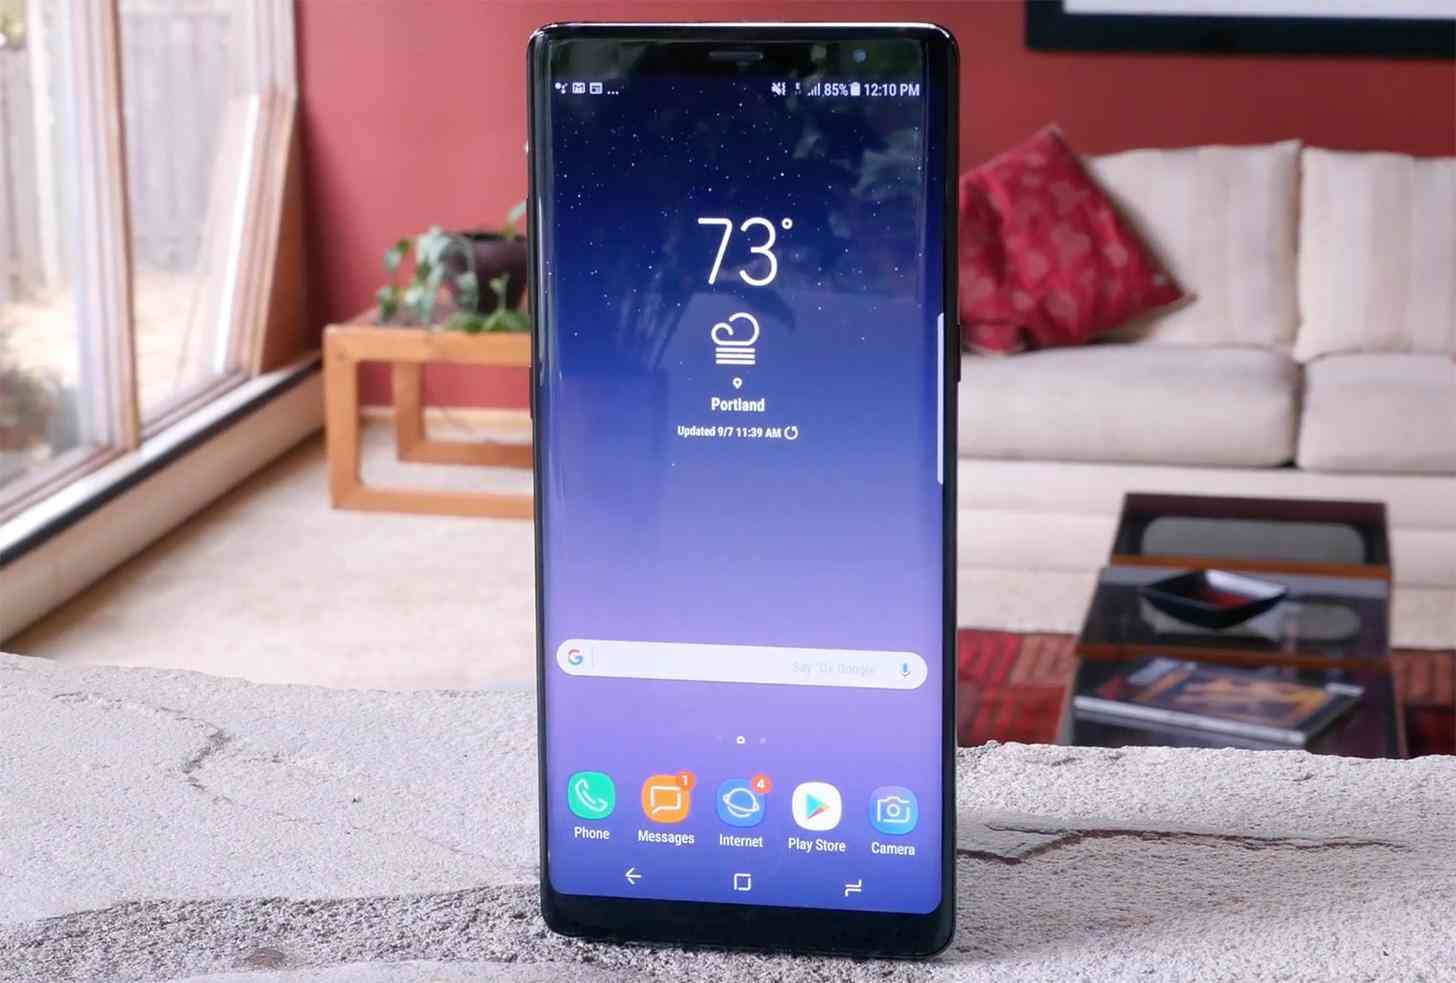 Samsung Galaxy Note 8 hands-on video